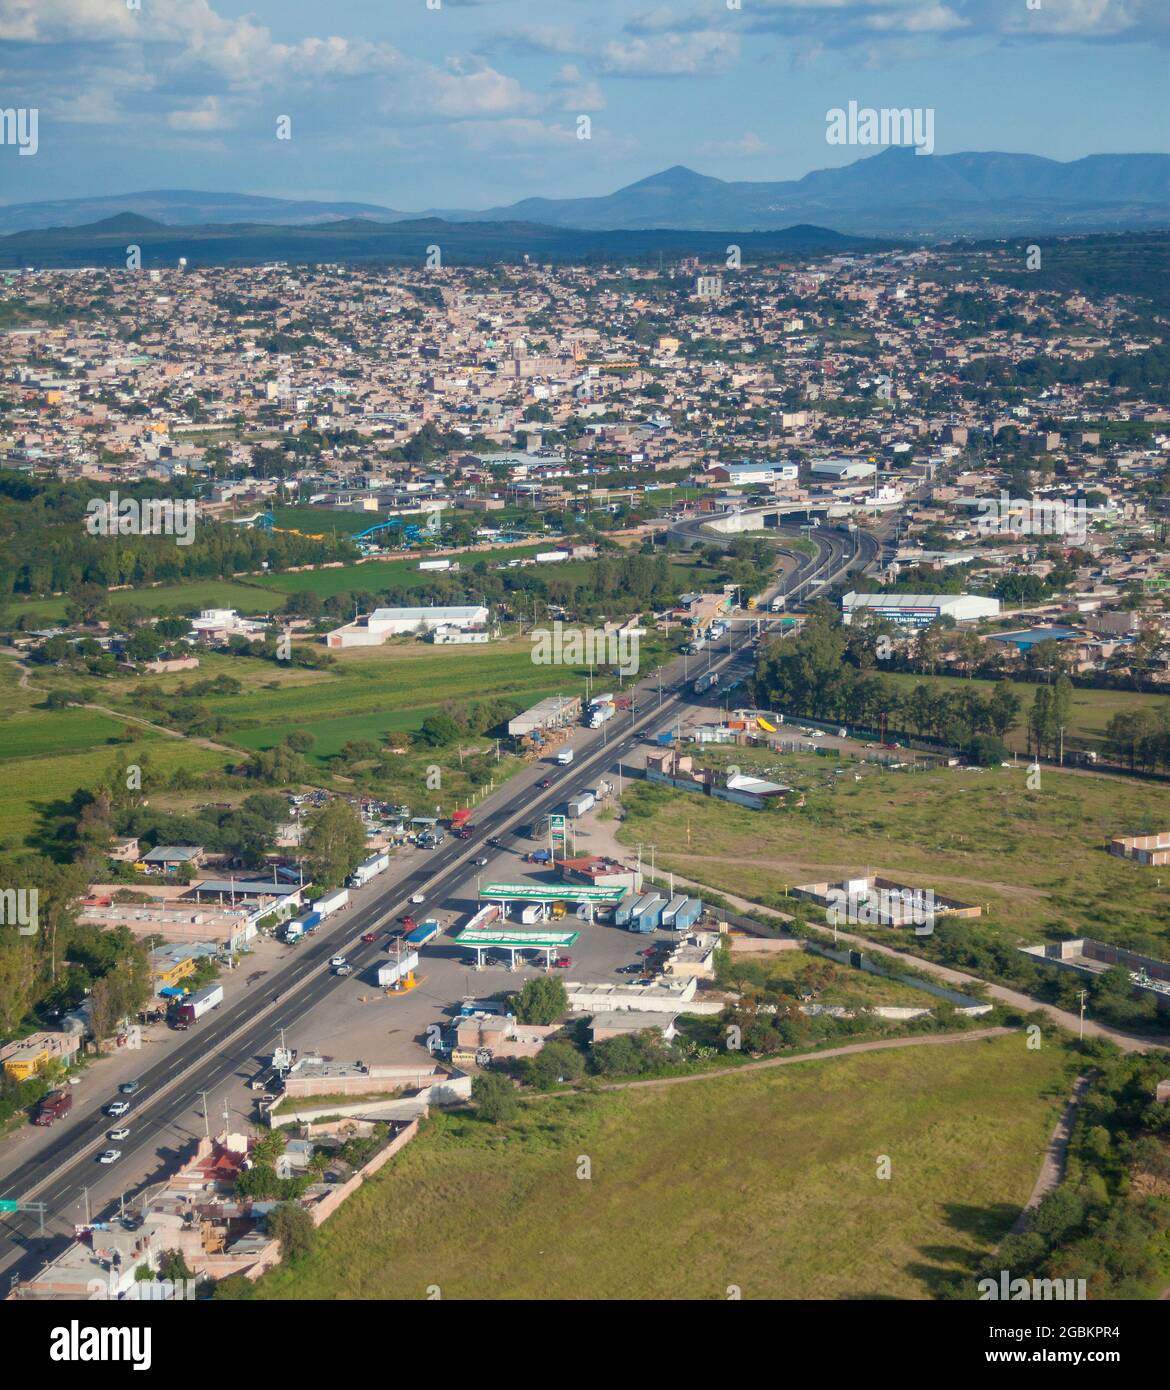 Traffic on highway in central Mexico aerial Stock Photo